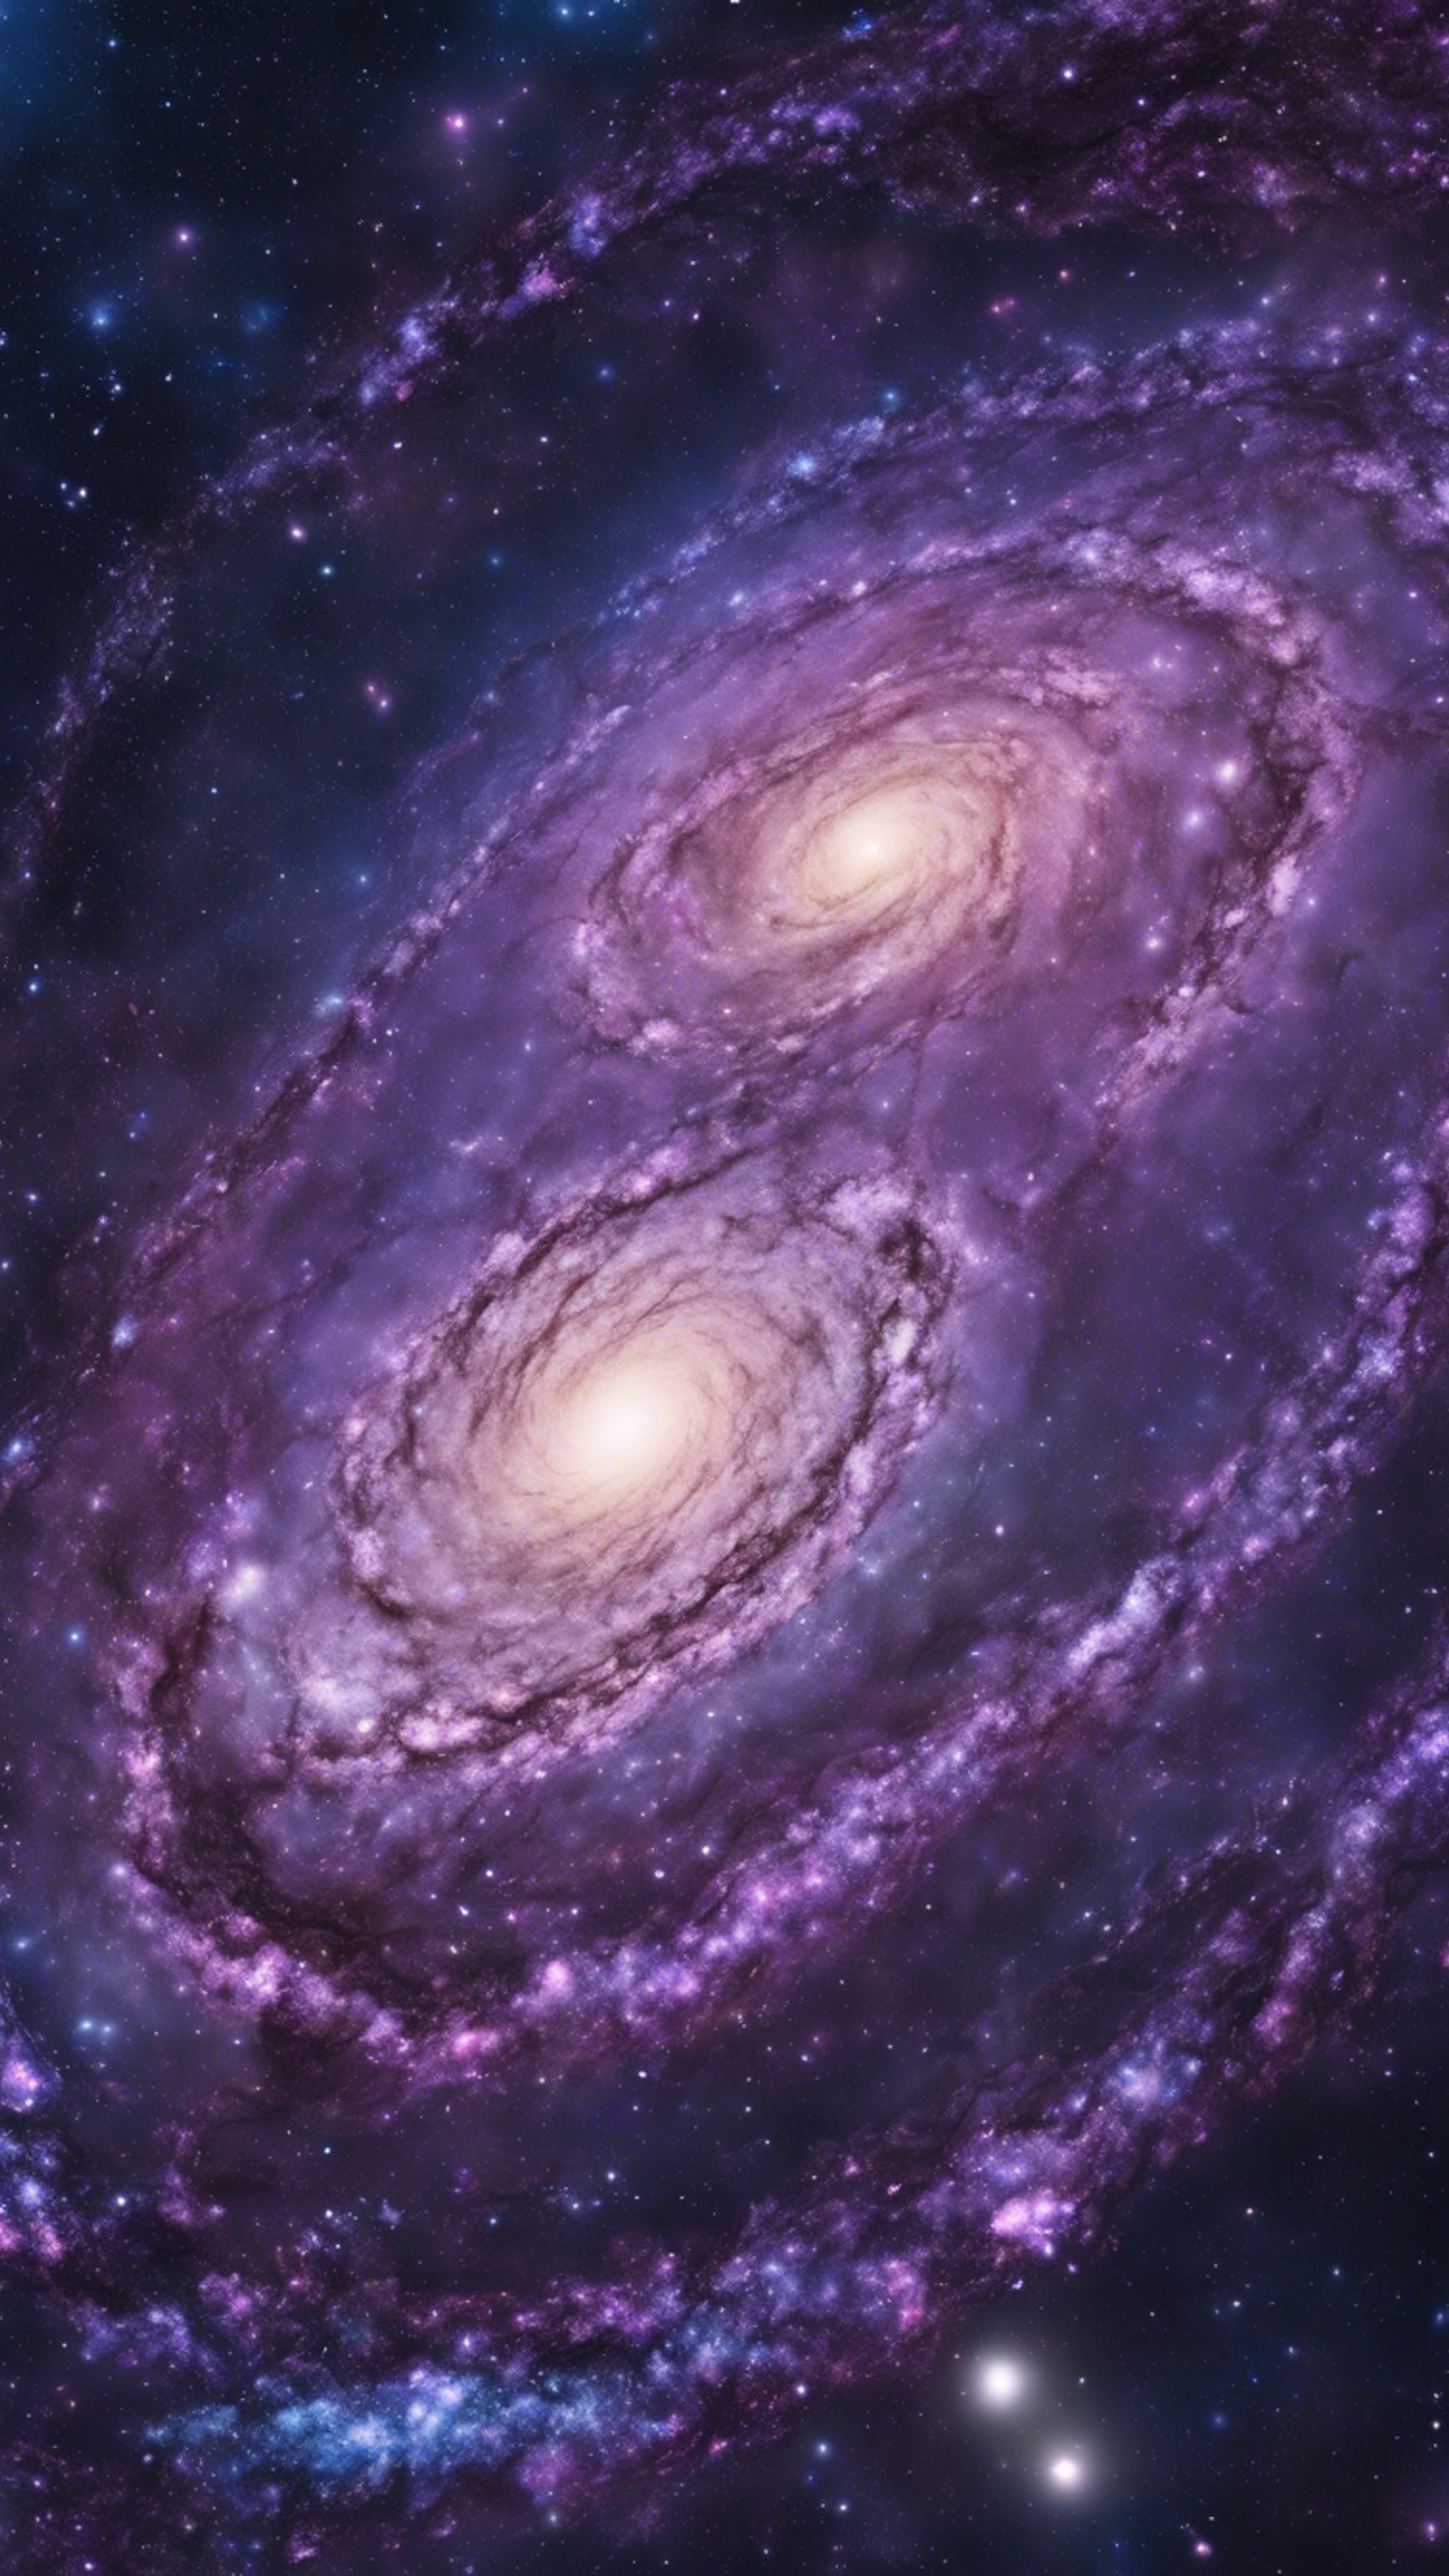 A spectacular galaxy with swirling patterns of purples and blues. Wallpaper[e57f5ee32b94469cbfb9]